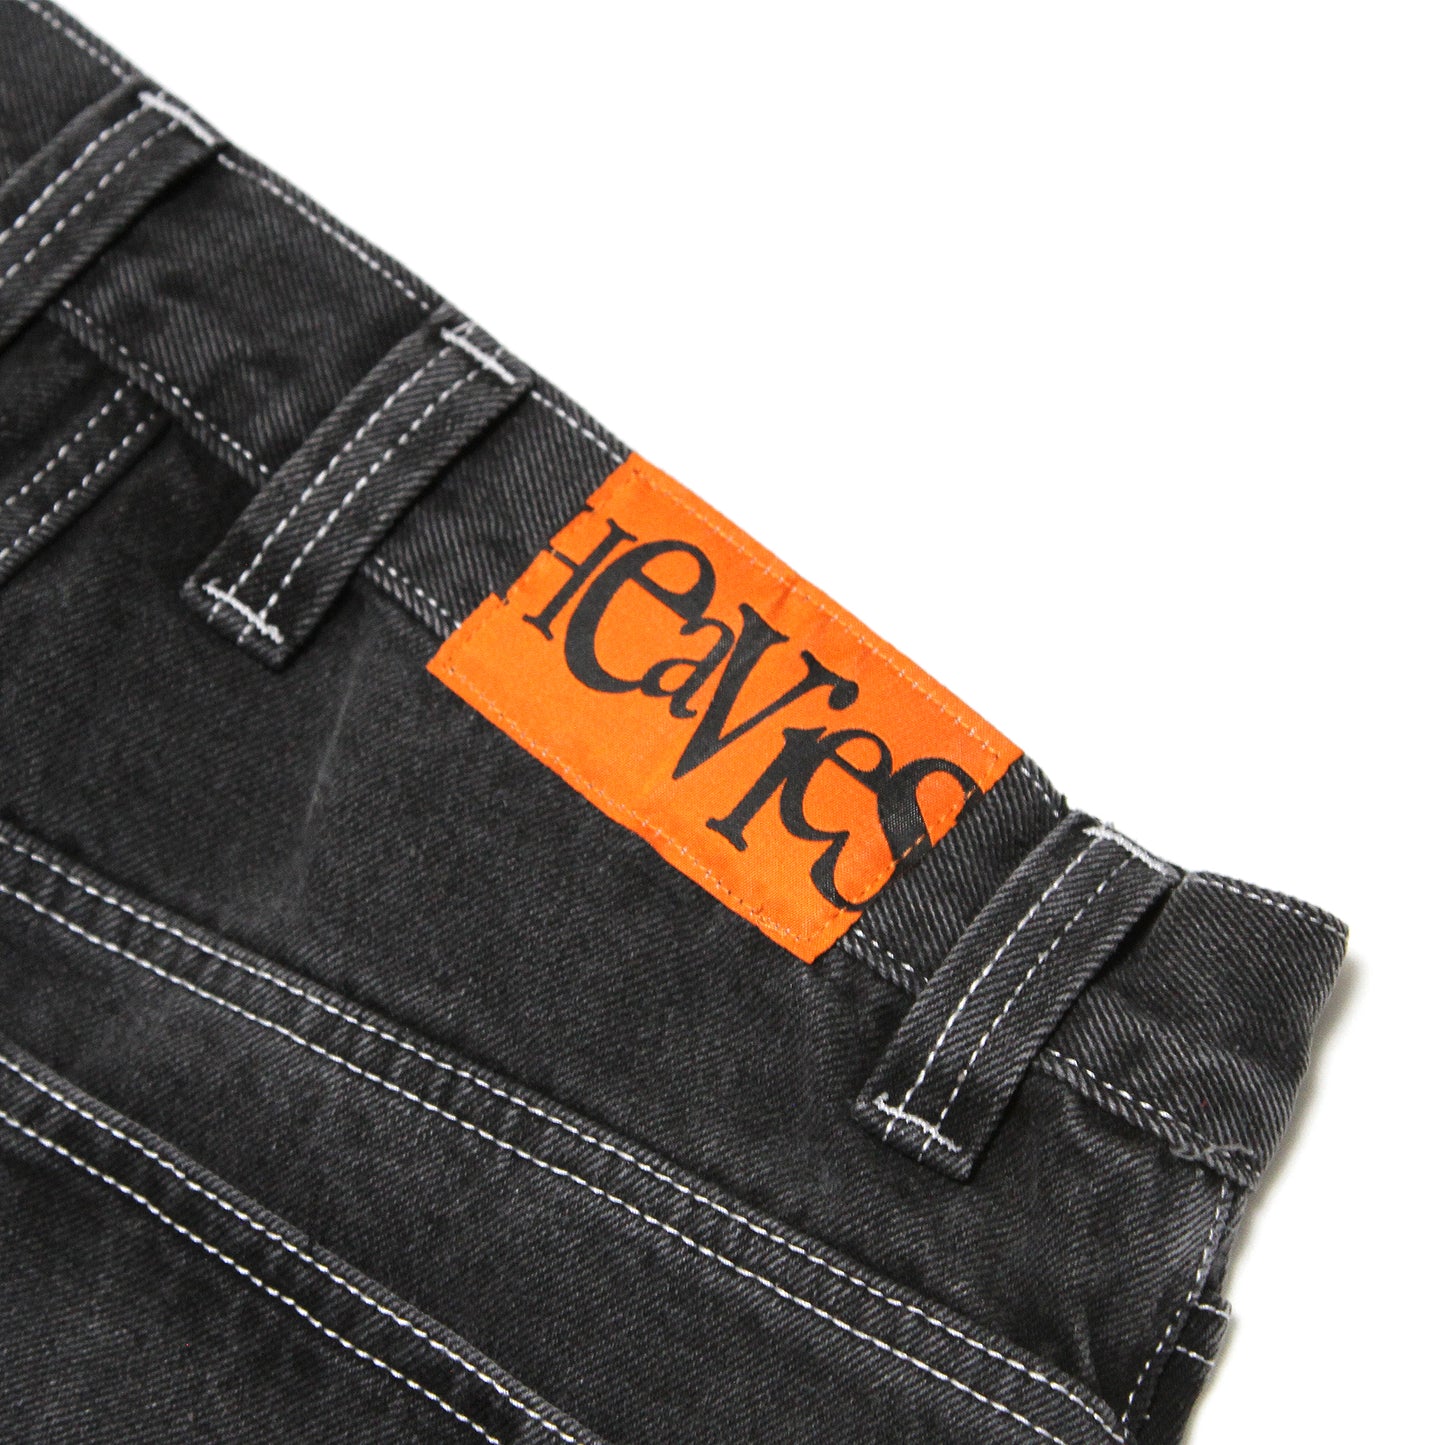 HEAVIES - 03 Jeans/Washed Black